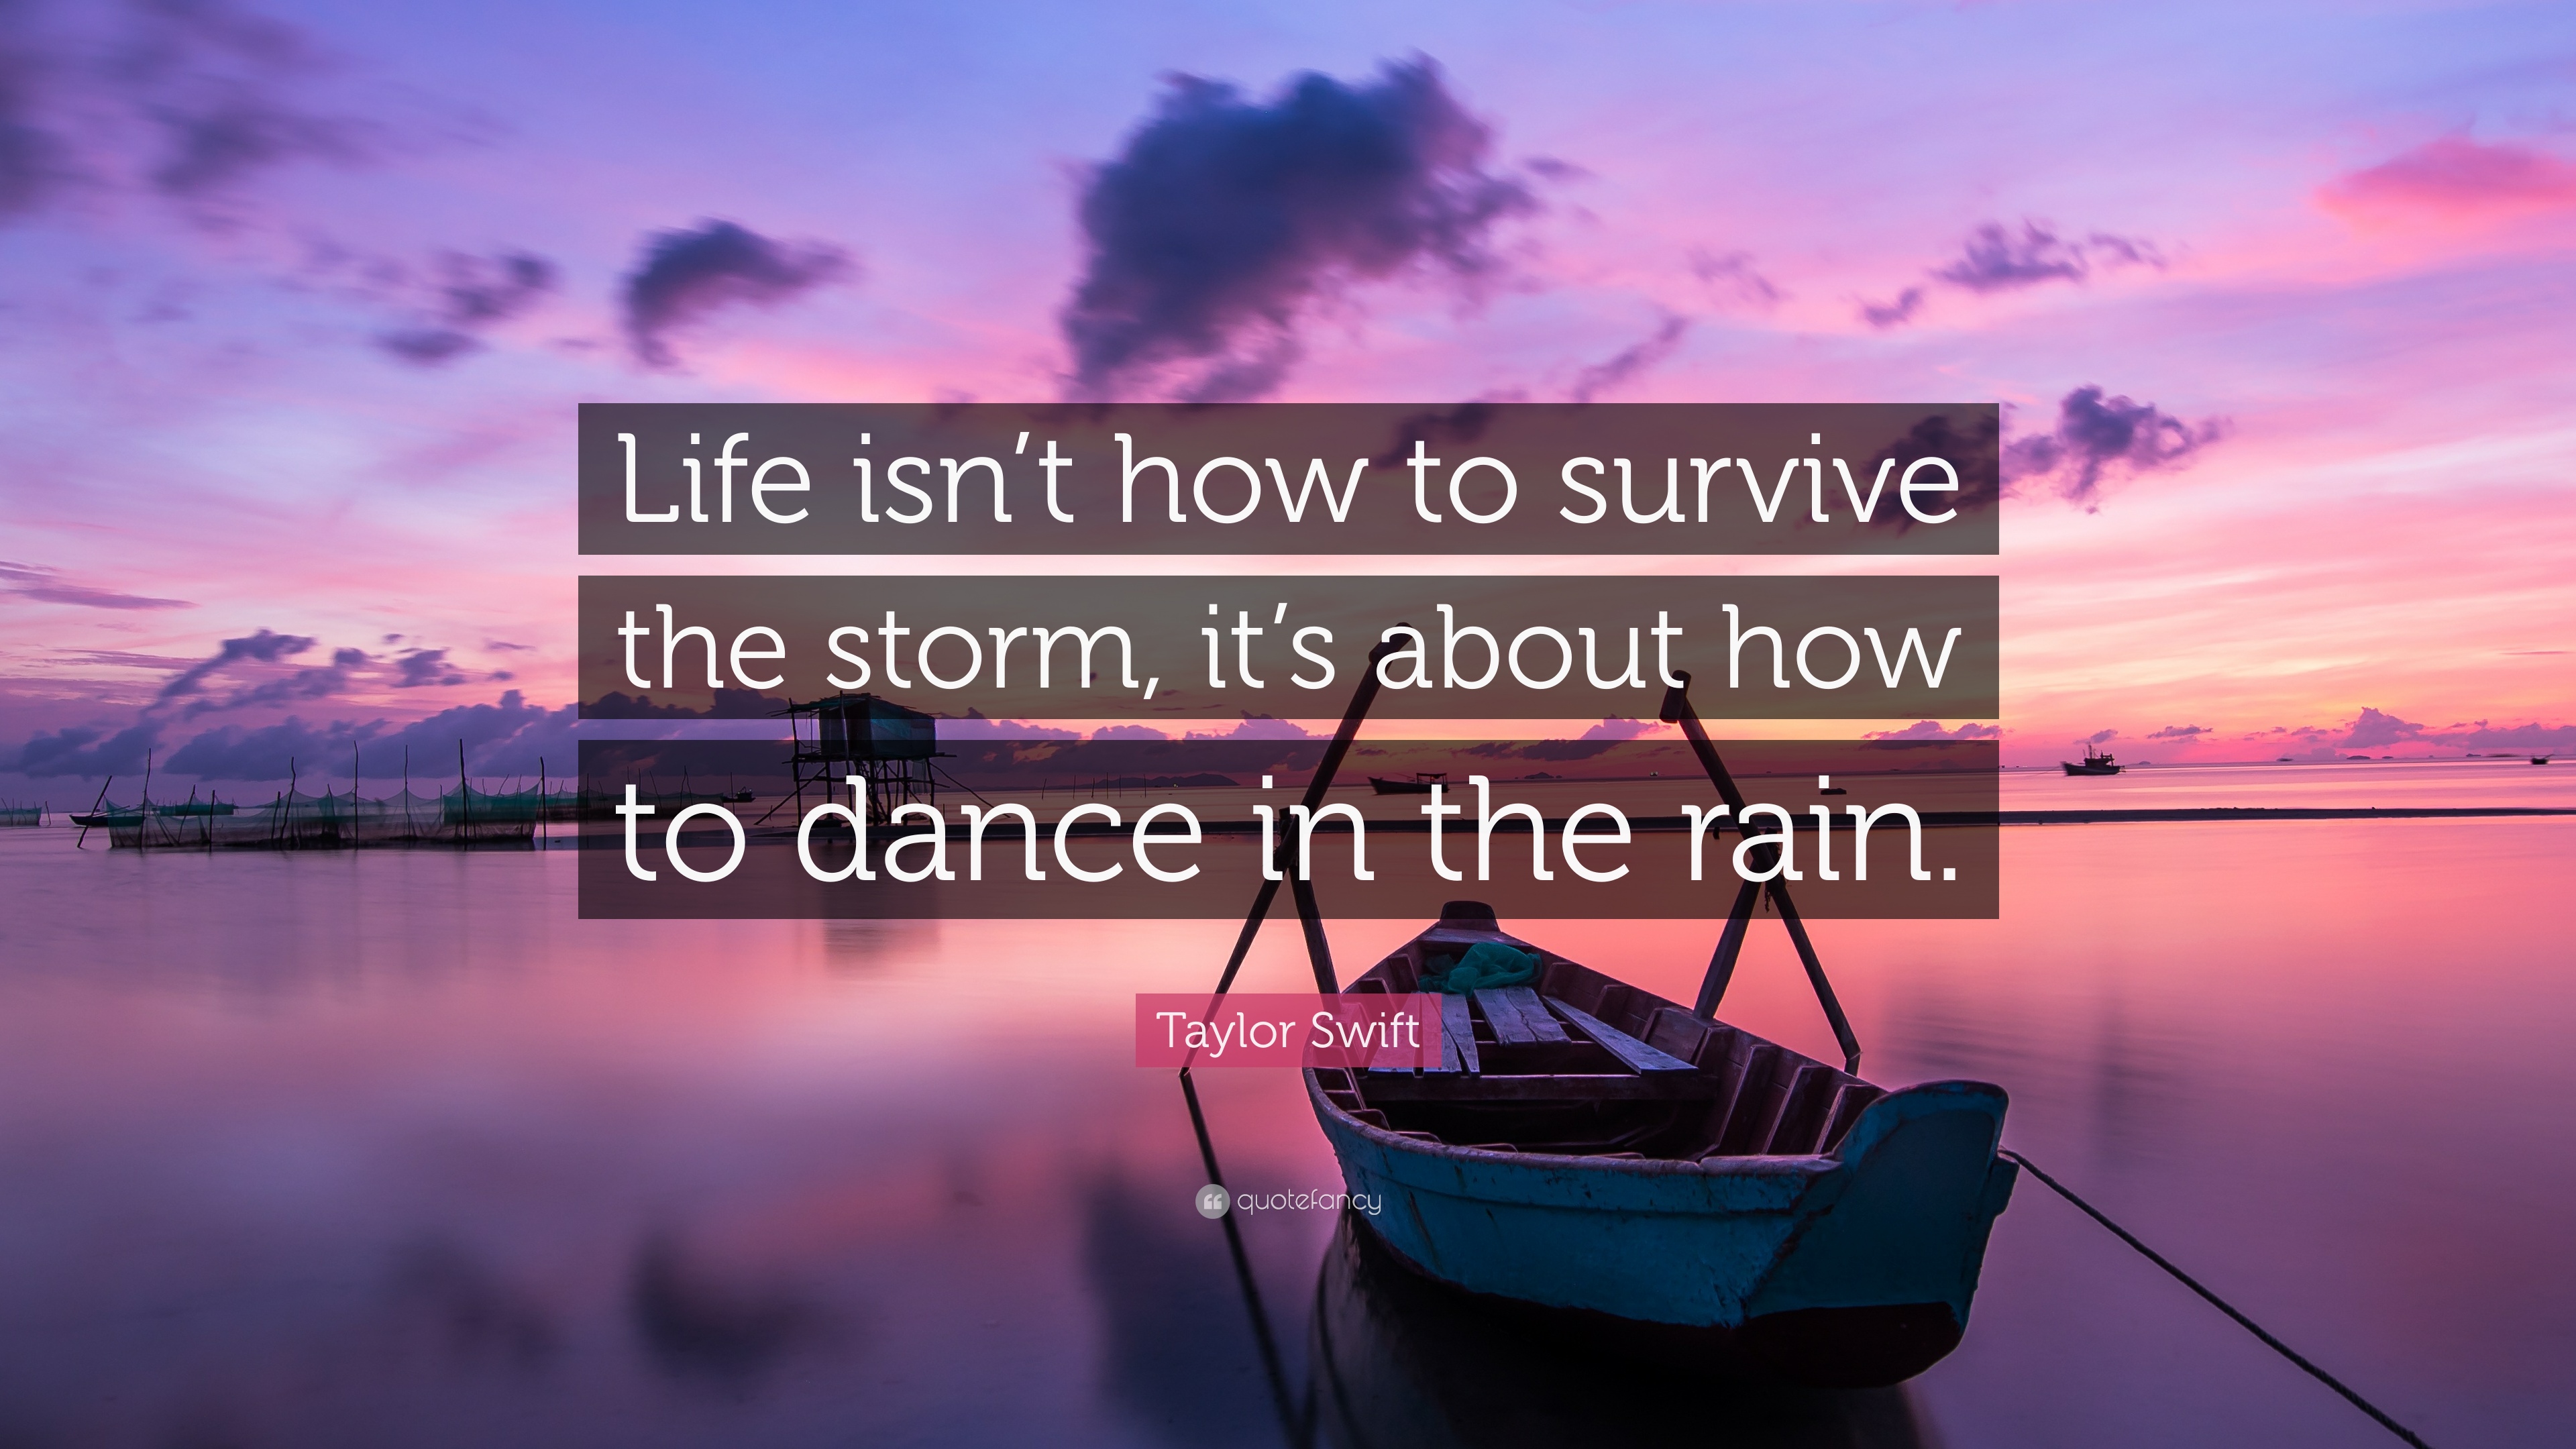 Taylor Swift Quote: “Life isn't how to survive the storm, it's about